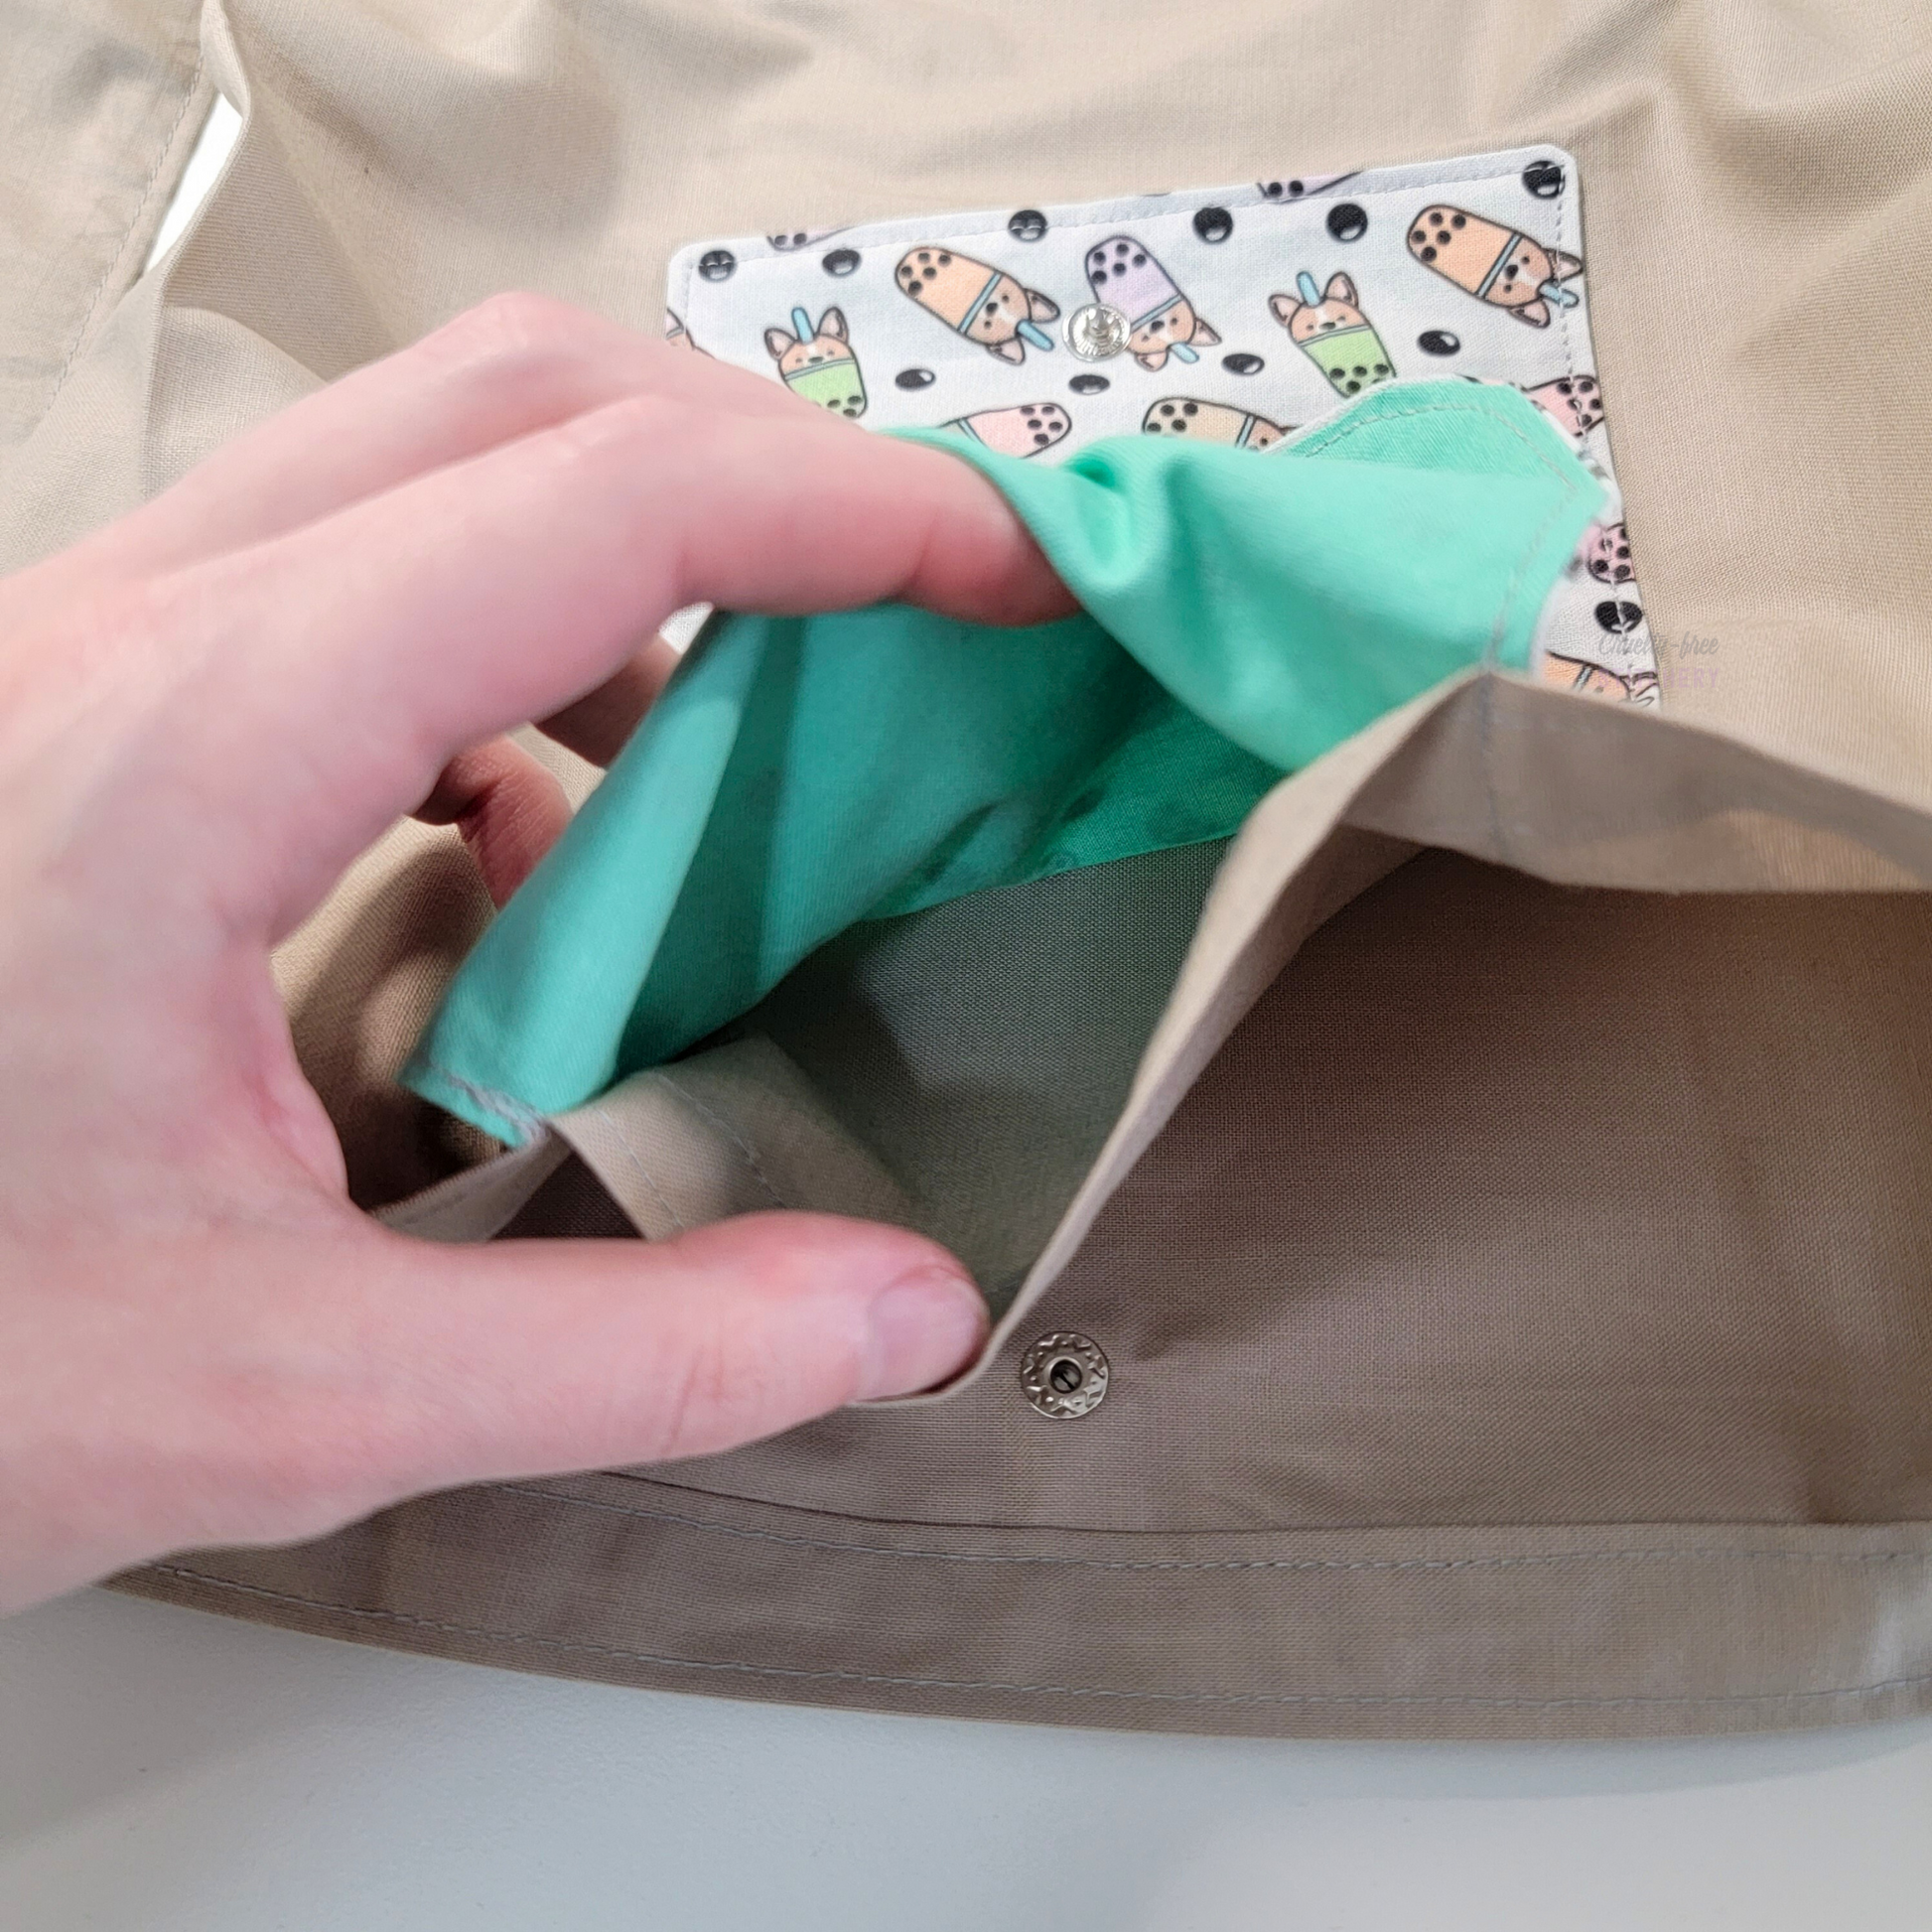 Inside of the foldable tote bag, a hidden pocket underneath the flap.